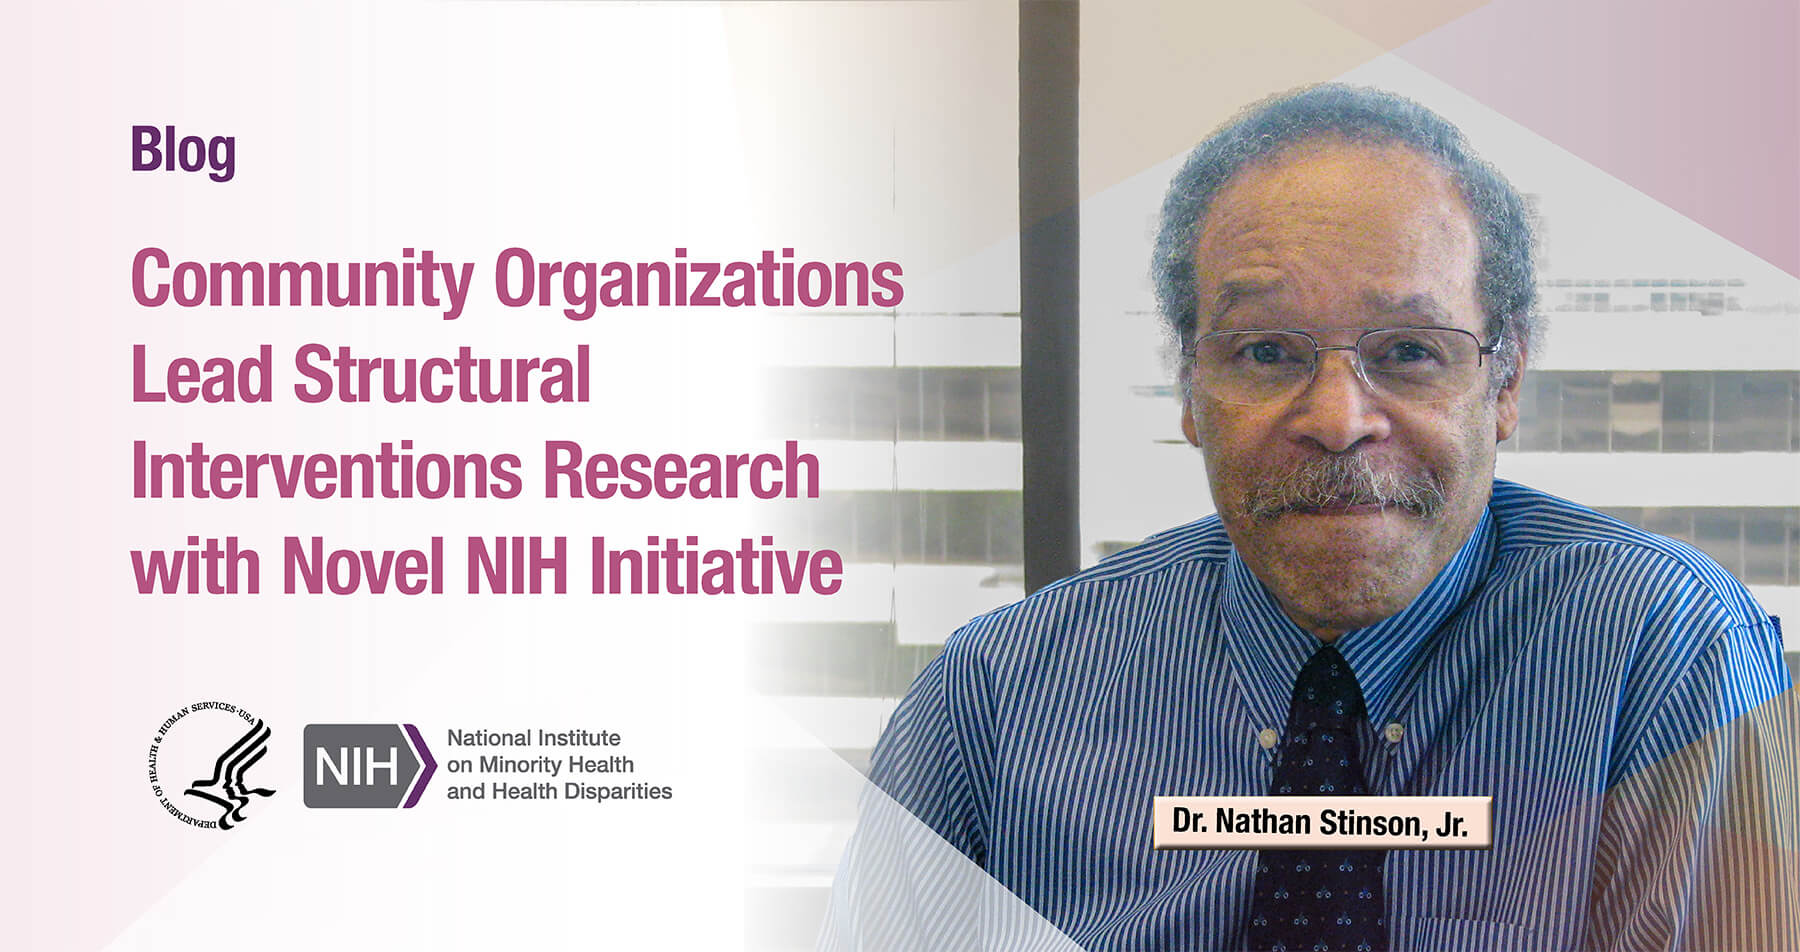 NIMHD Insights blog: Community Organizations Lead Structural Interventions Research with Novel NIH Initiative by Dr. Nathan Stinson, Jr.